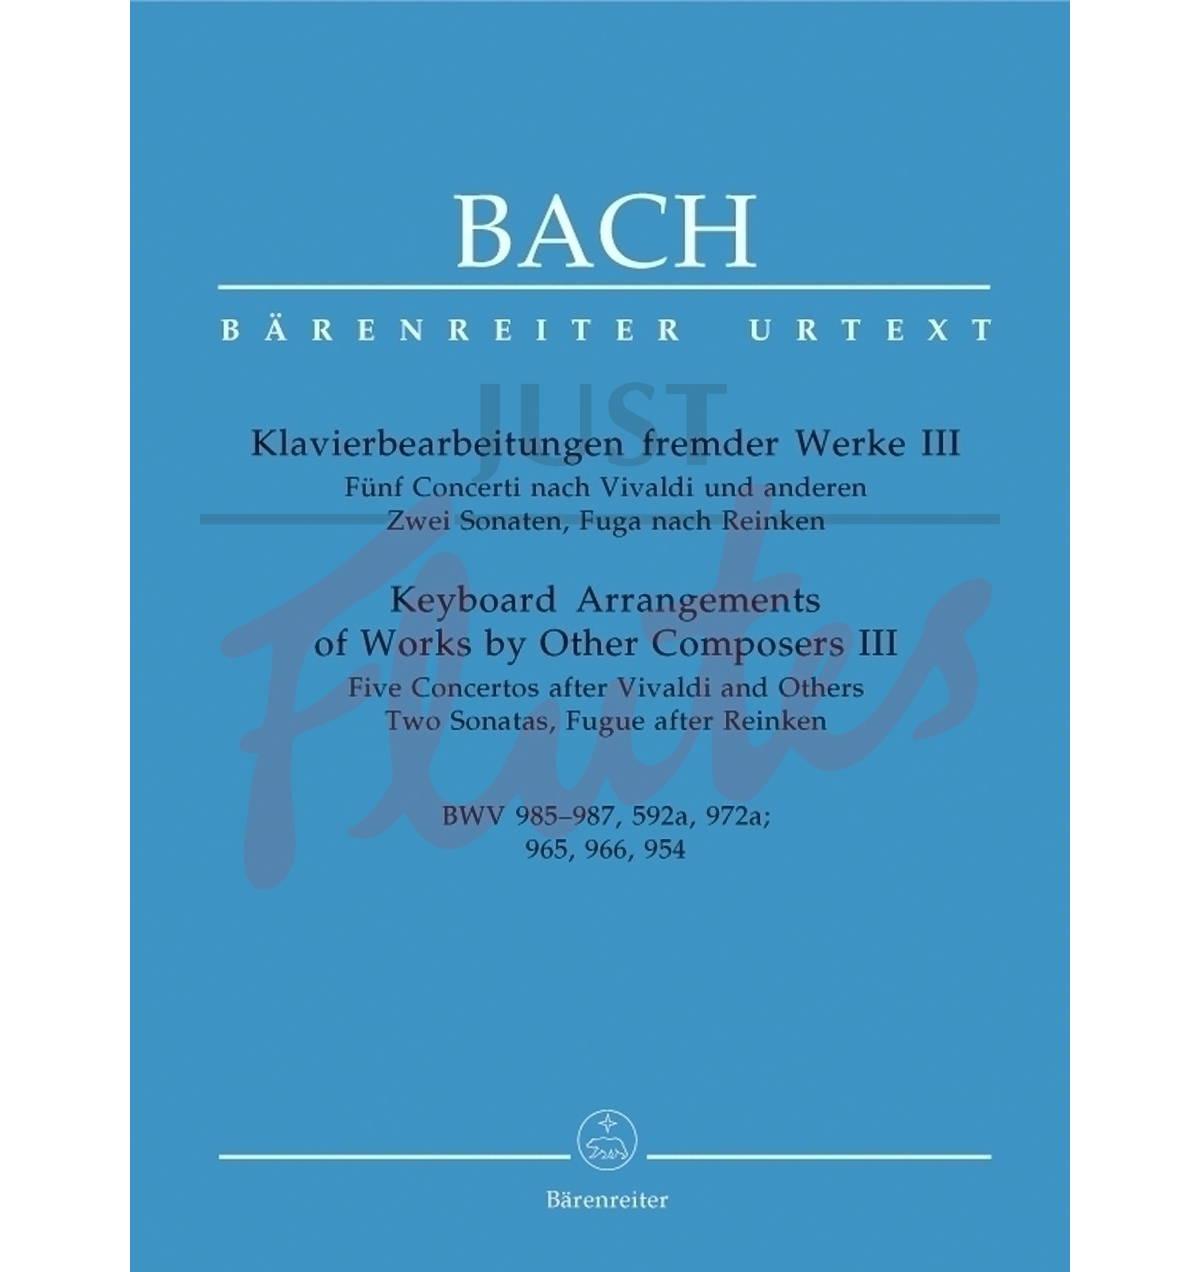 Keyboard Arrangements of Works by Other Composers Vol 3